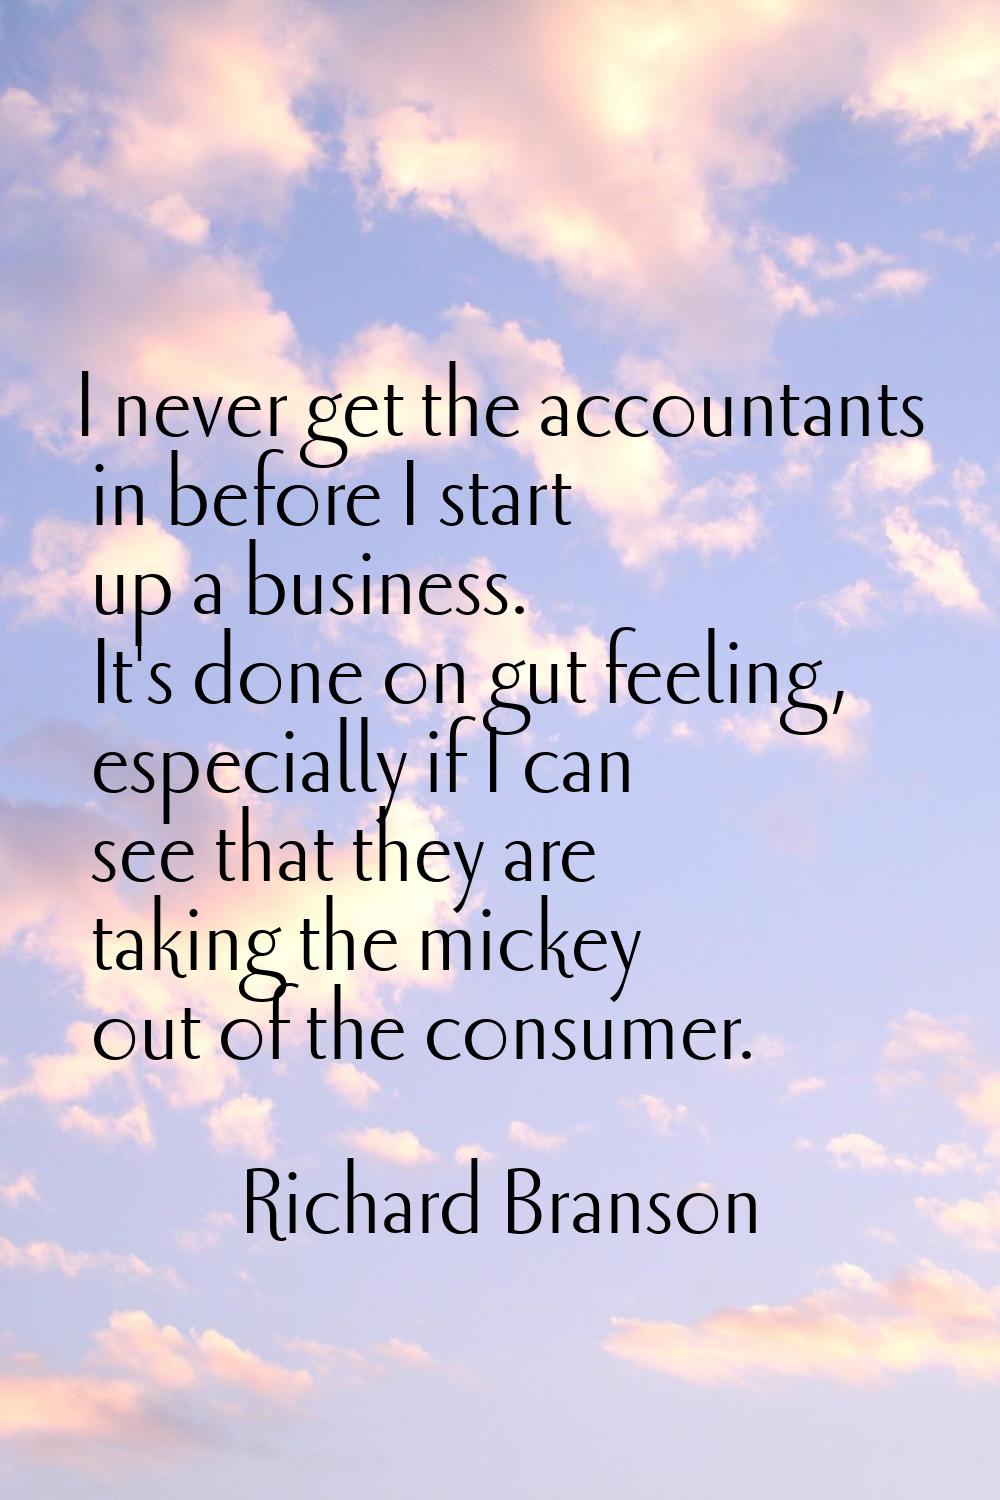 I never get the accountants in before I start up a business. It's done on gut feeling, especially i